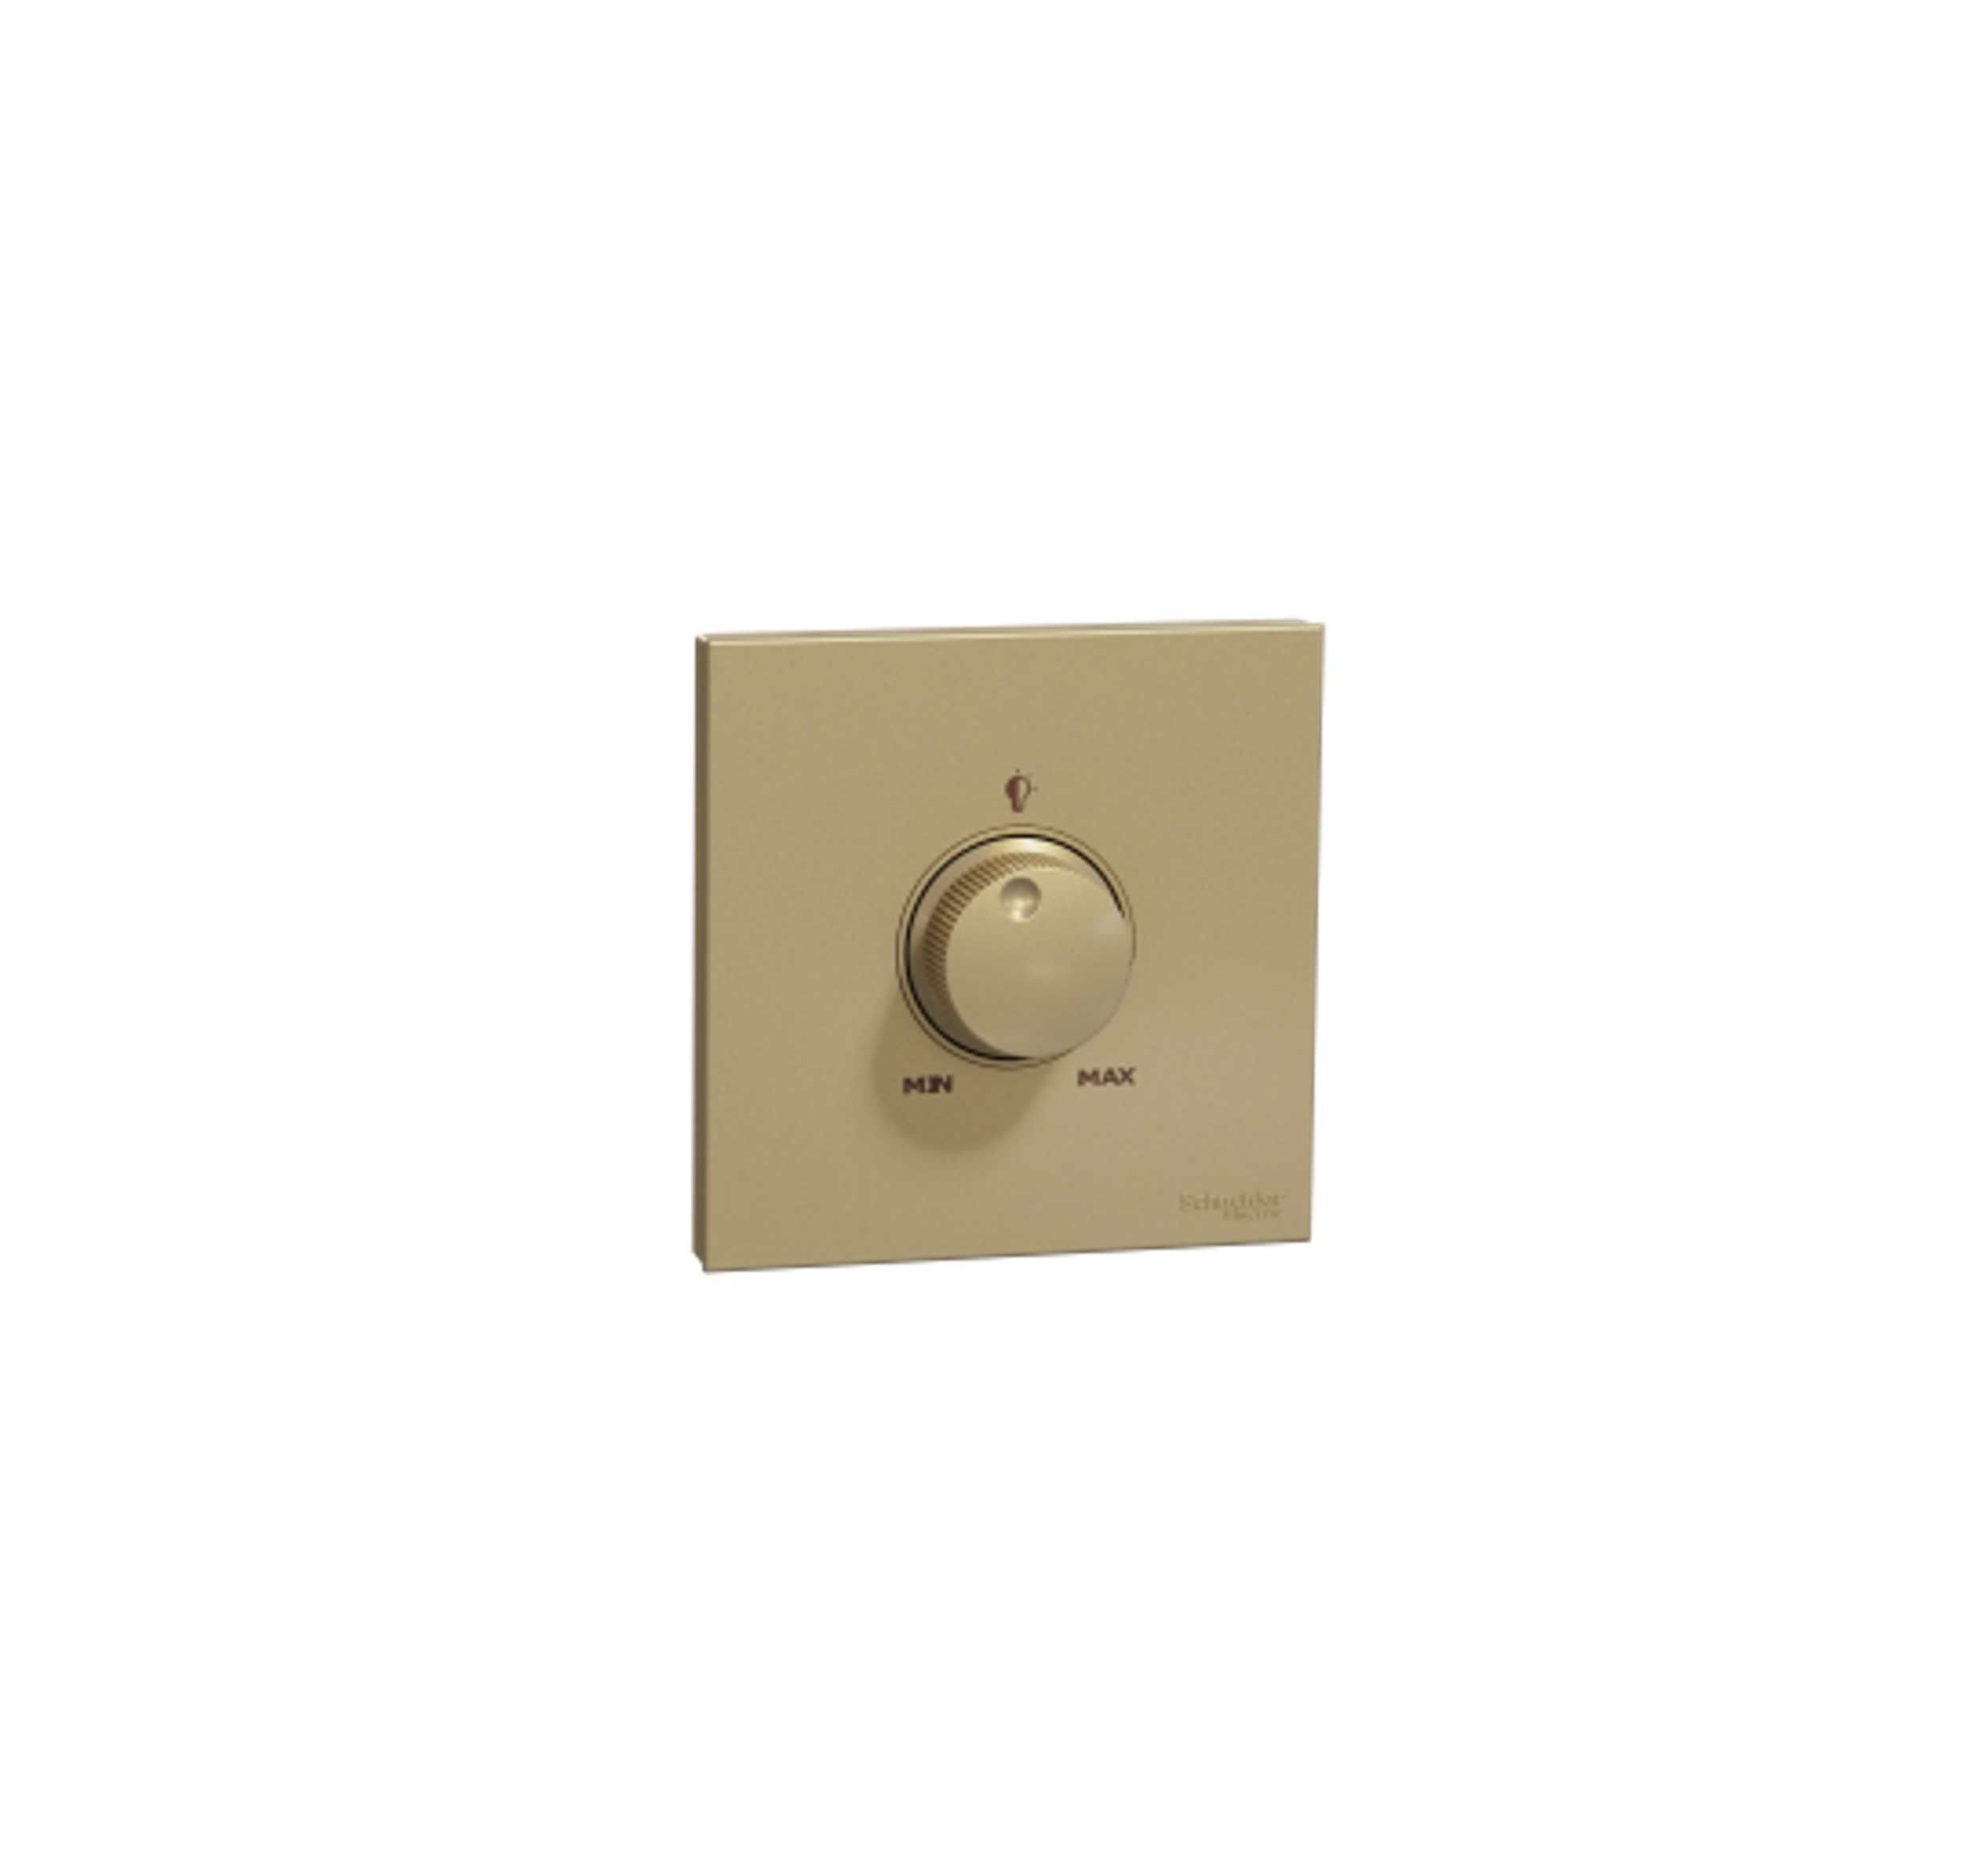 AvatarOn C - Universal Dimmer with Switch (Wine Gold)